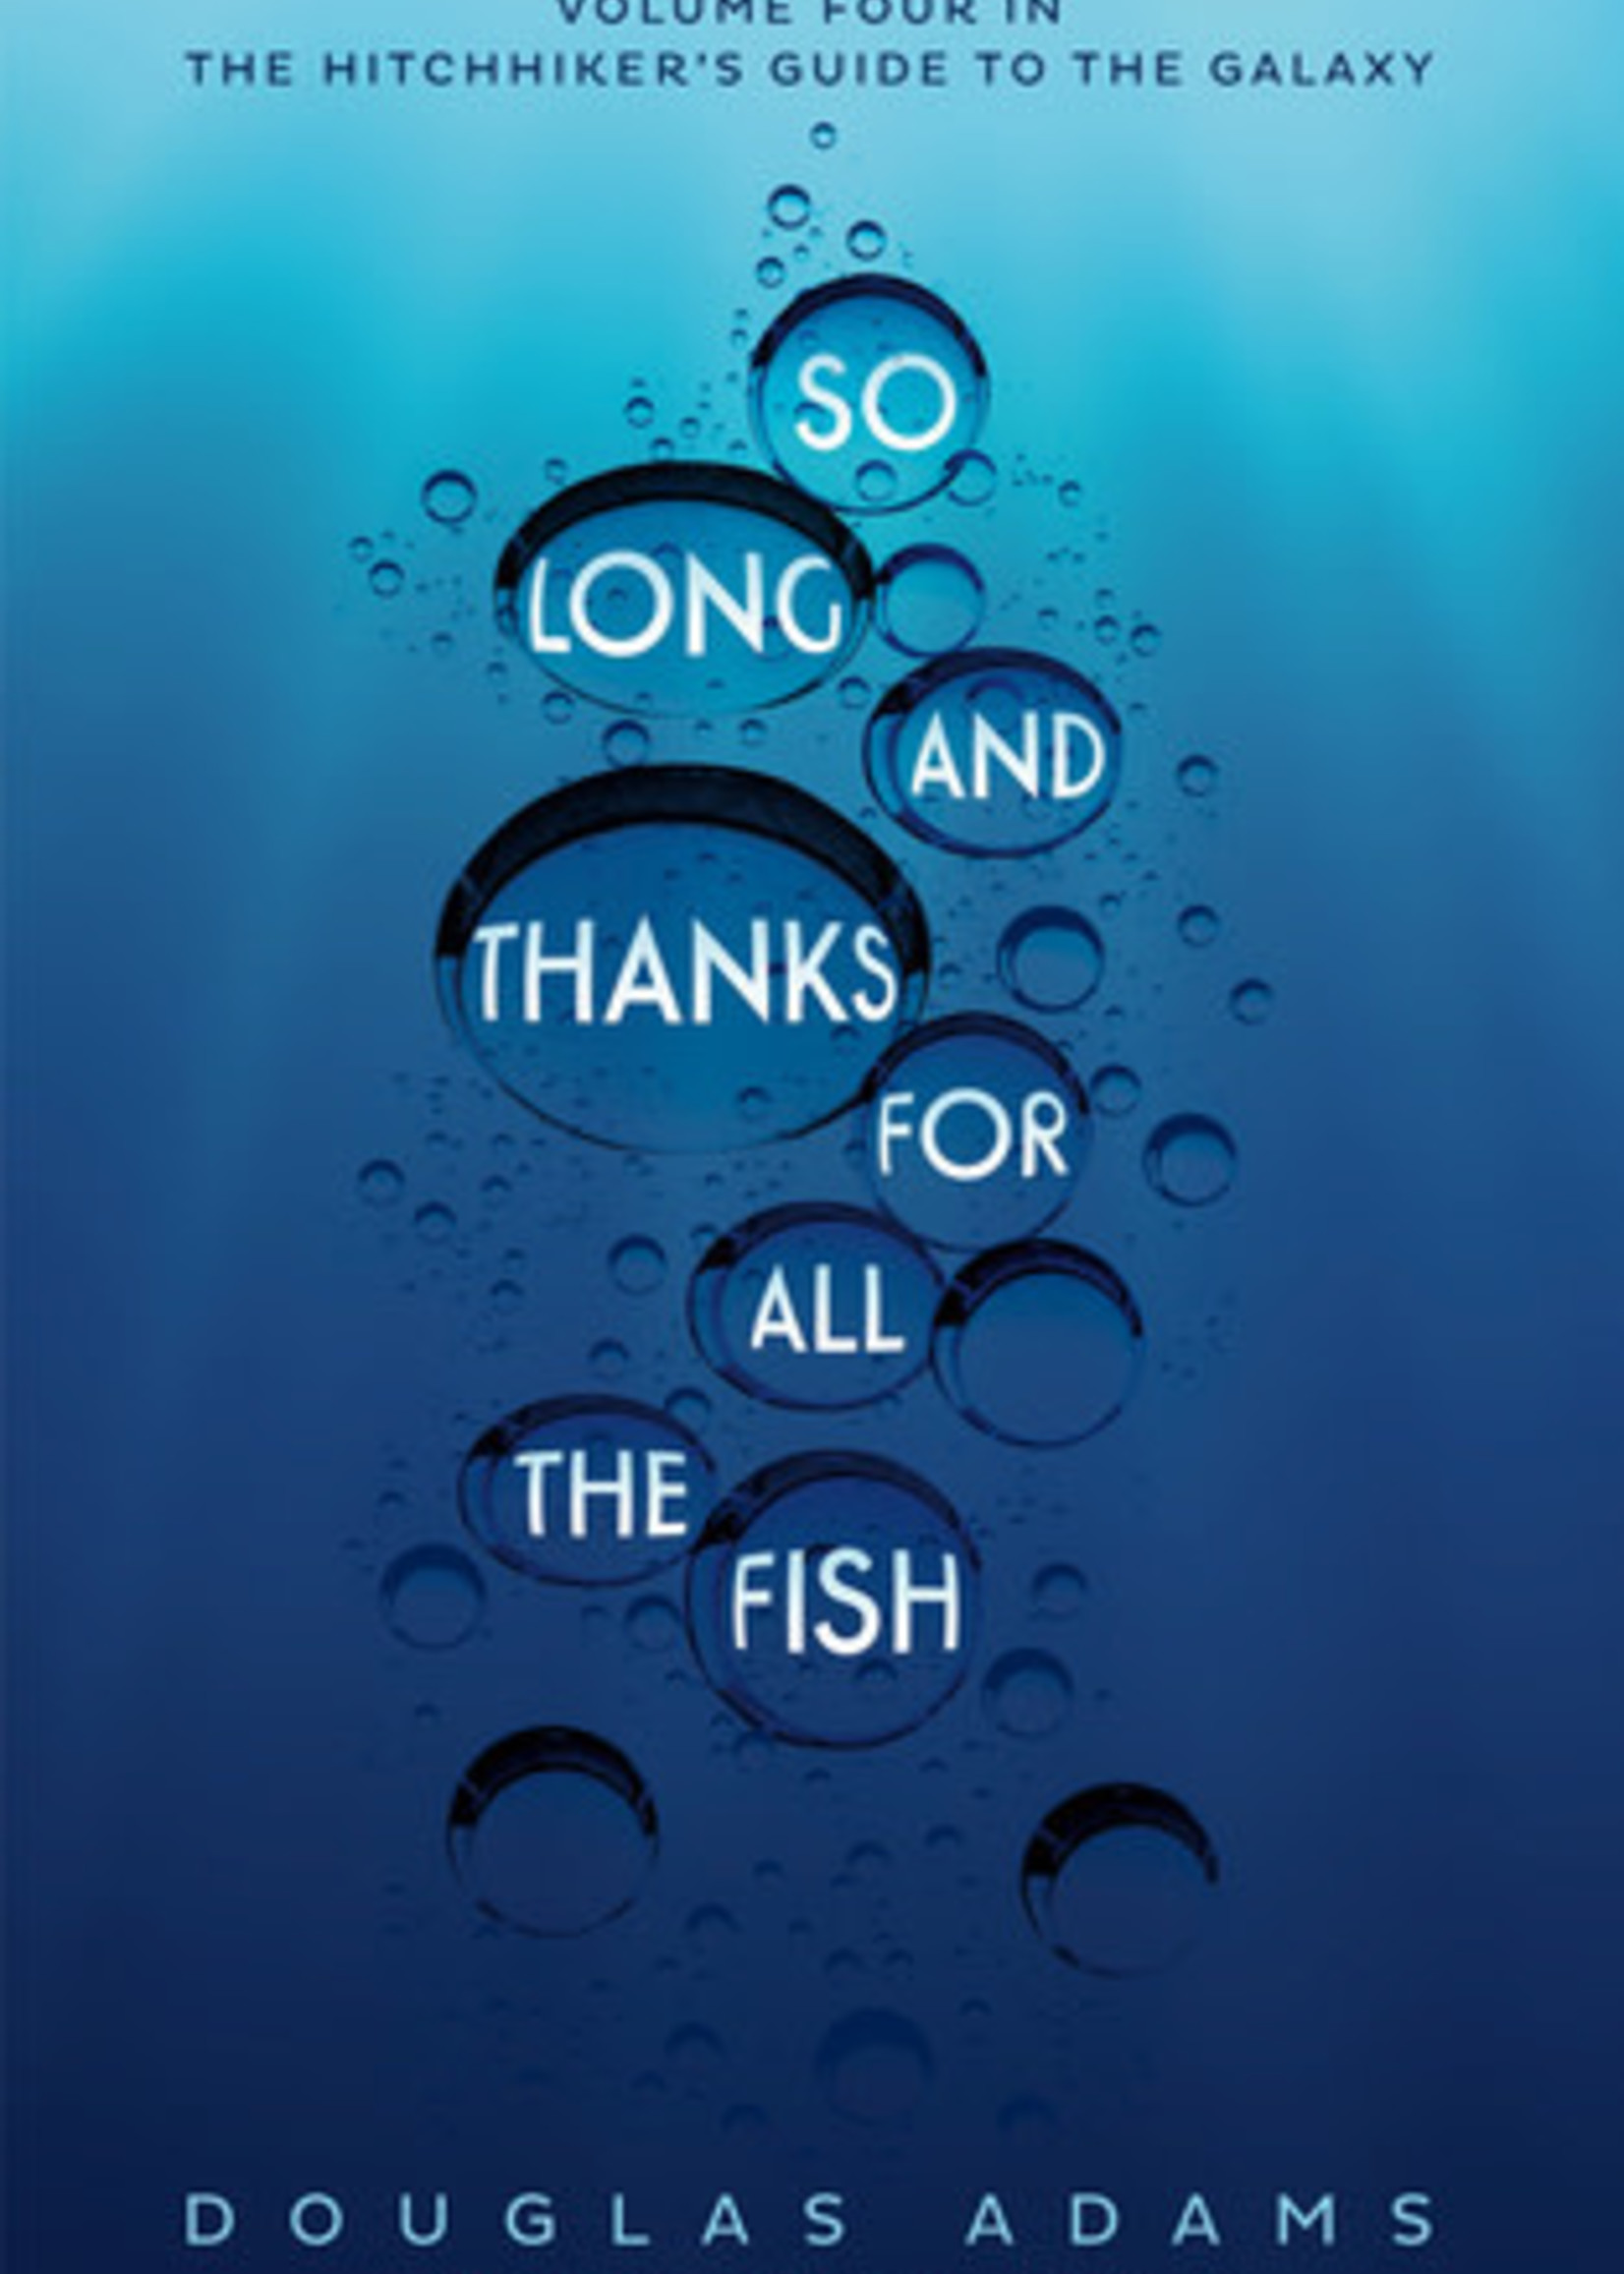 So Long, and Thanks for All the Fish (The Hitchhiker's Guide to the Galaxy #4) by Douglas Adams